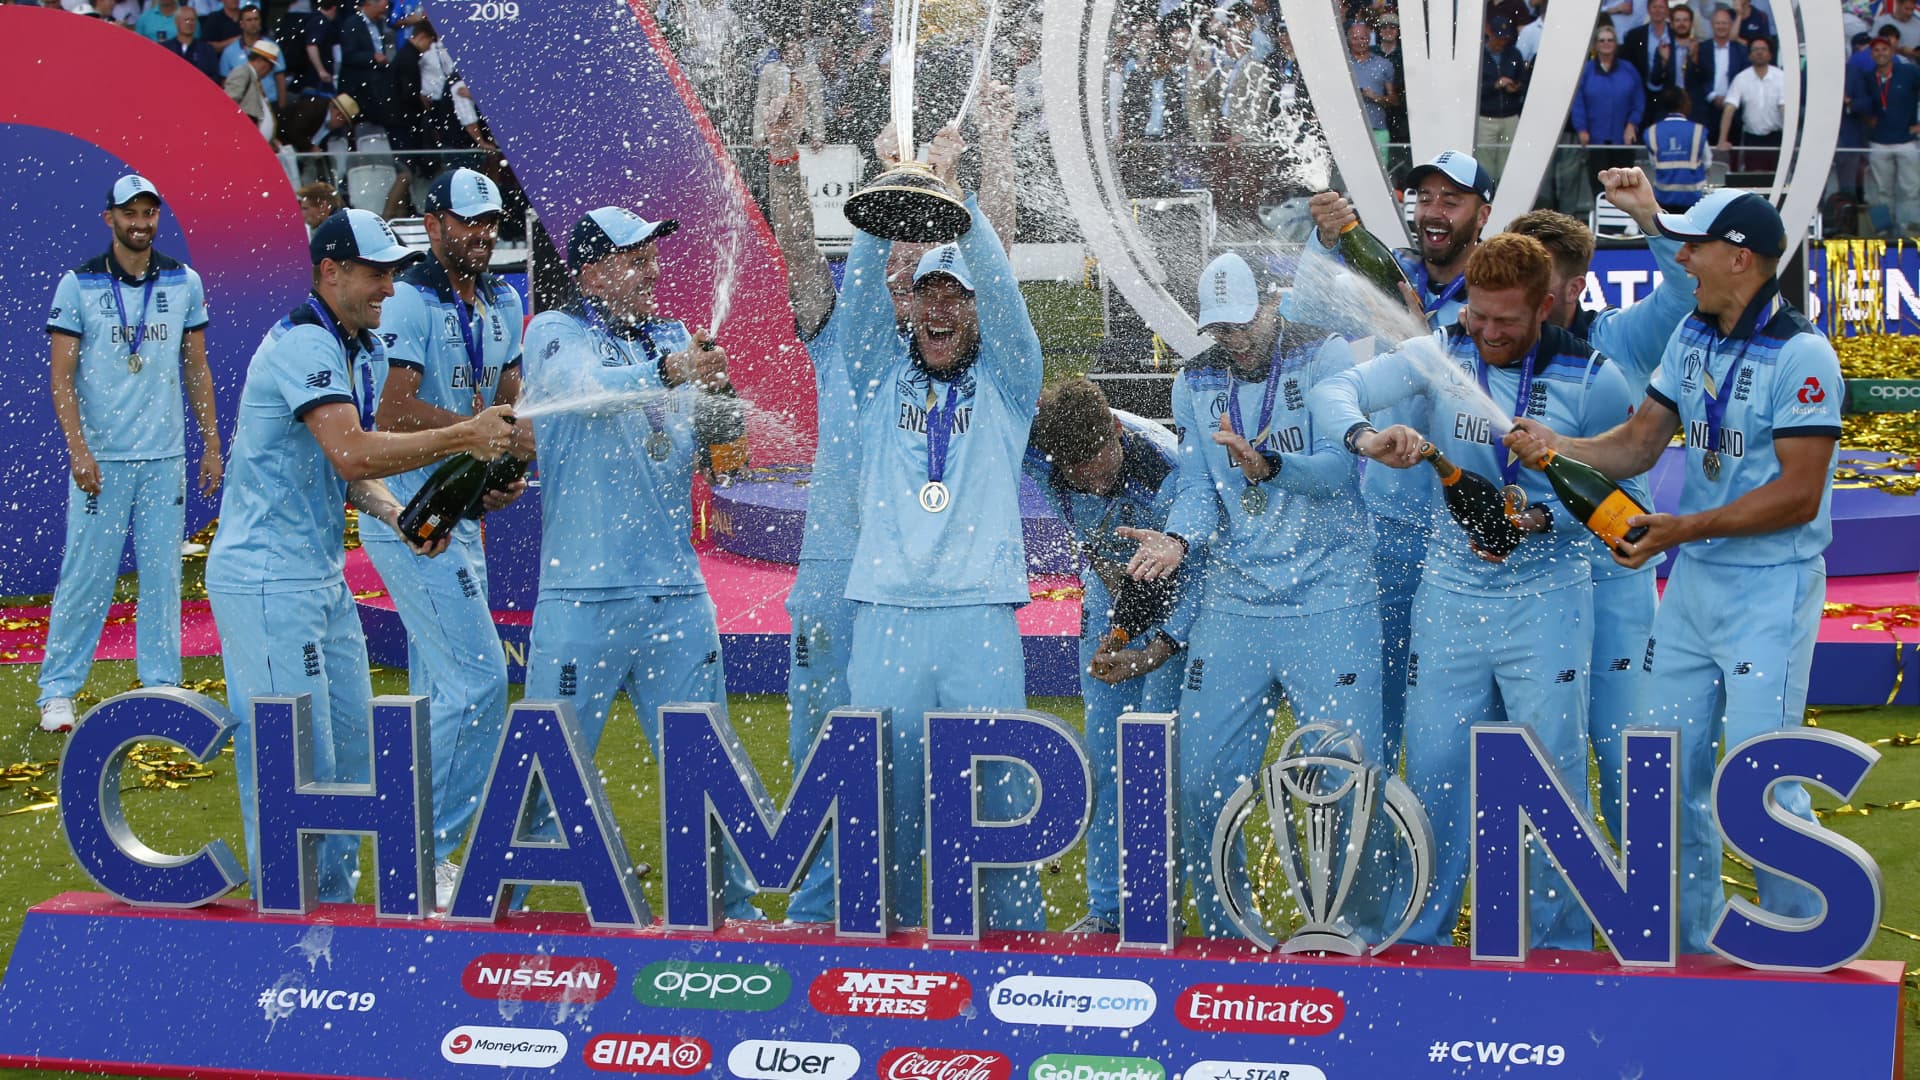 England cricket team claim victory with dramatic World Cup win